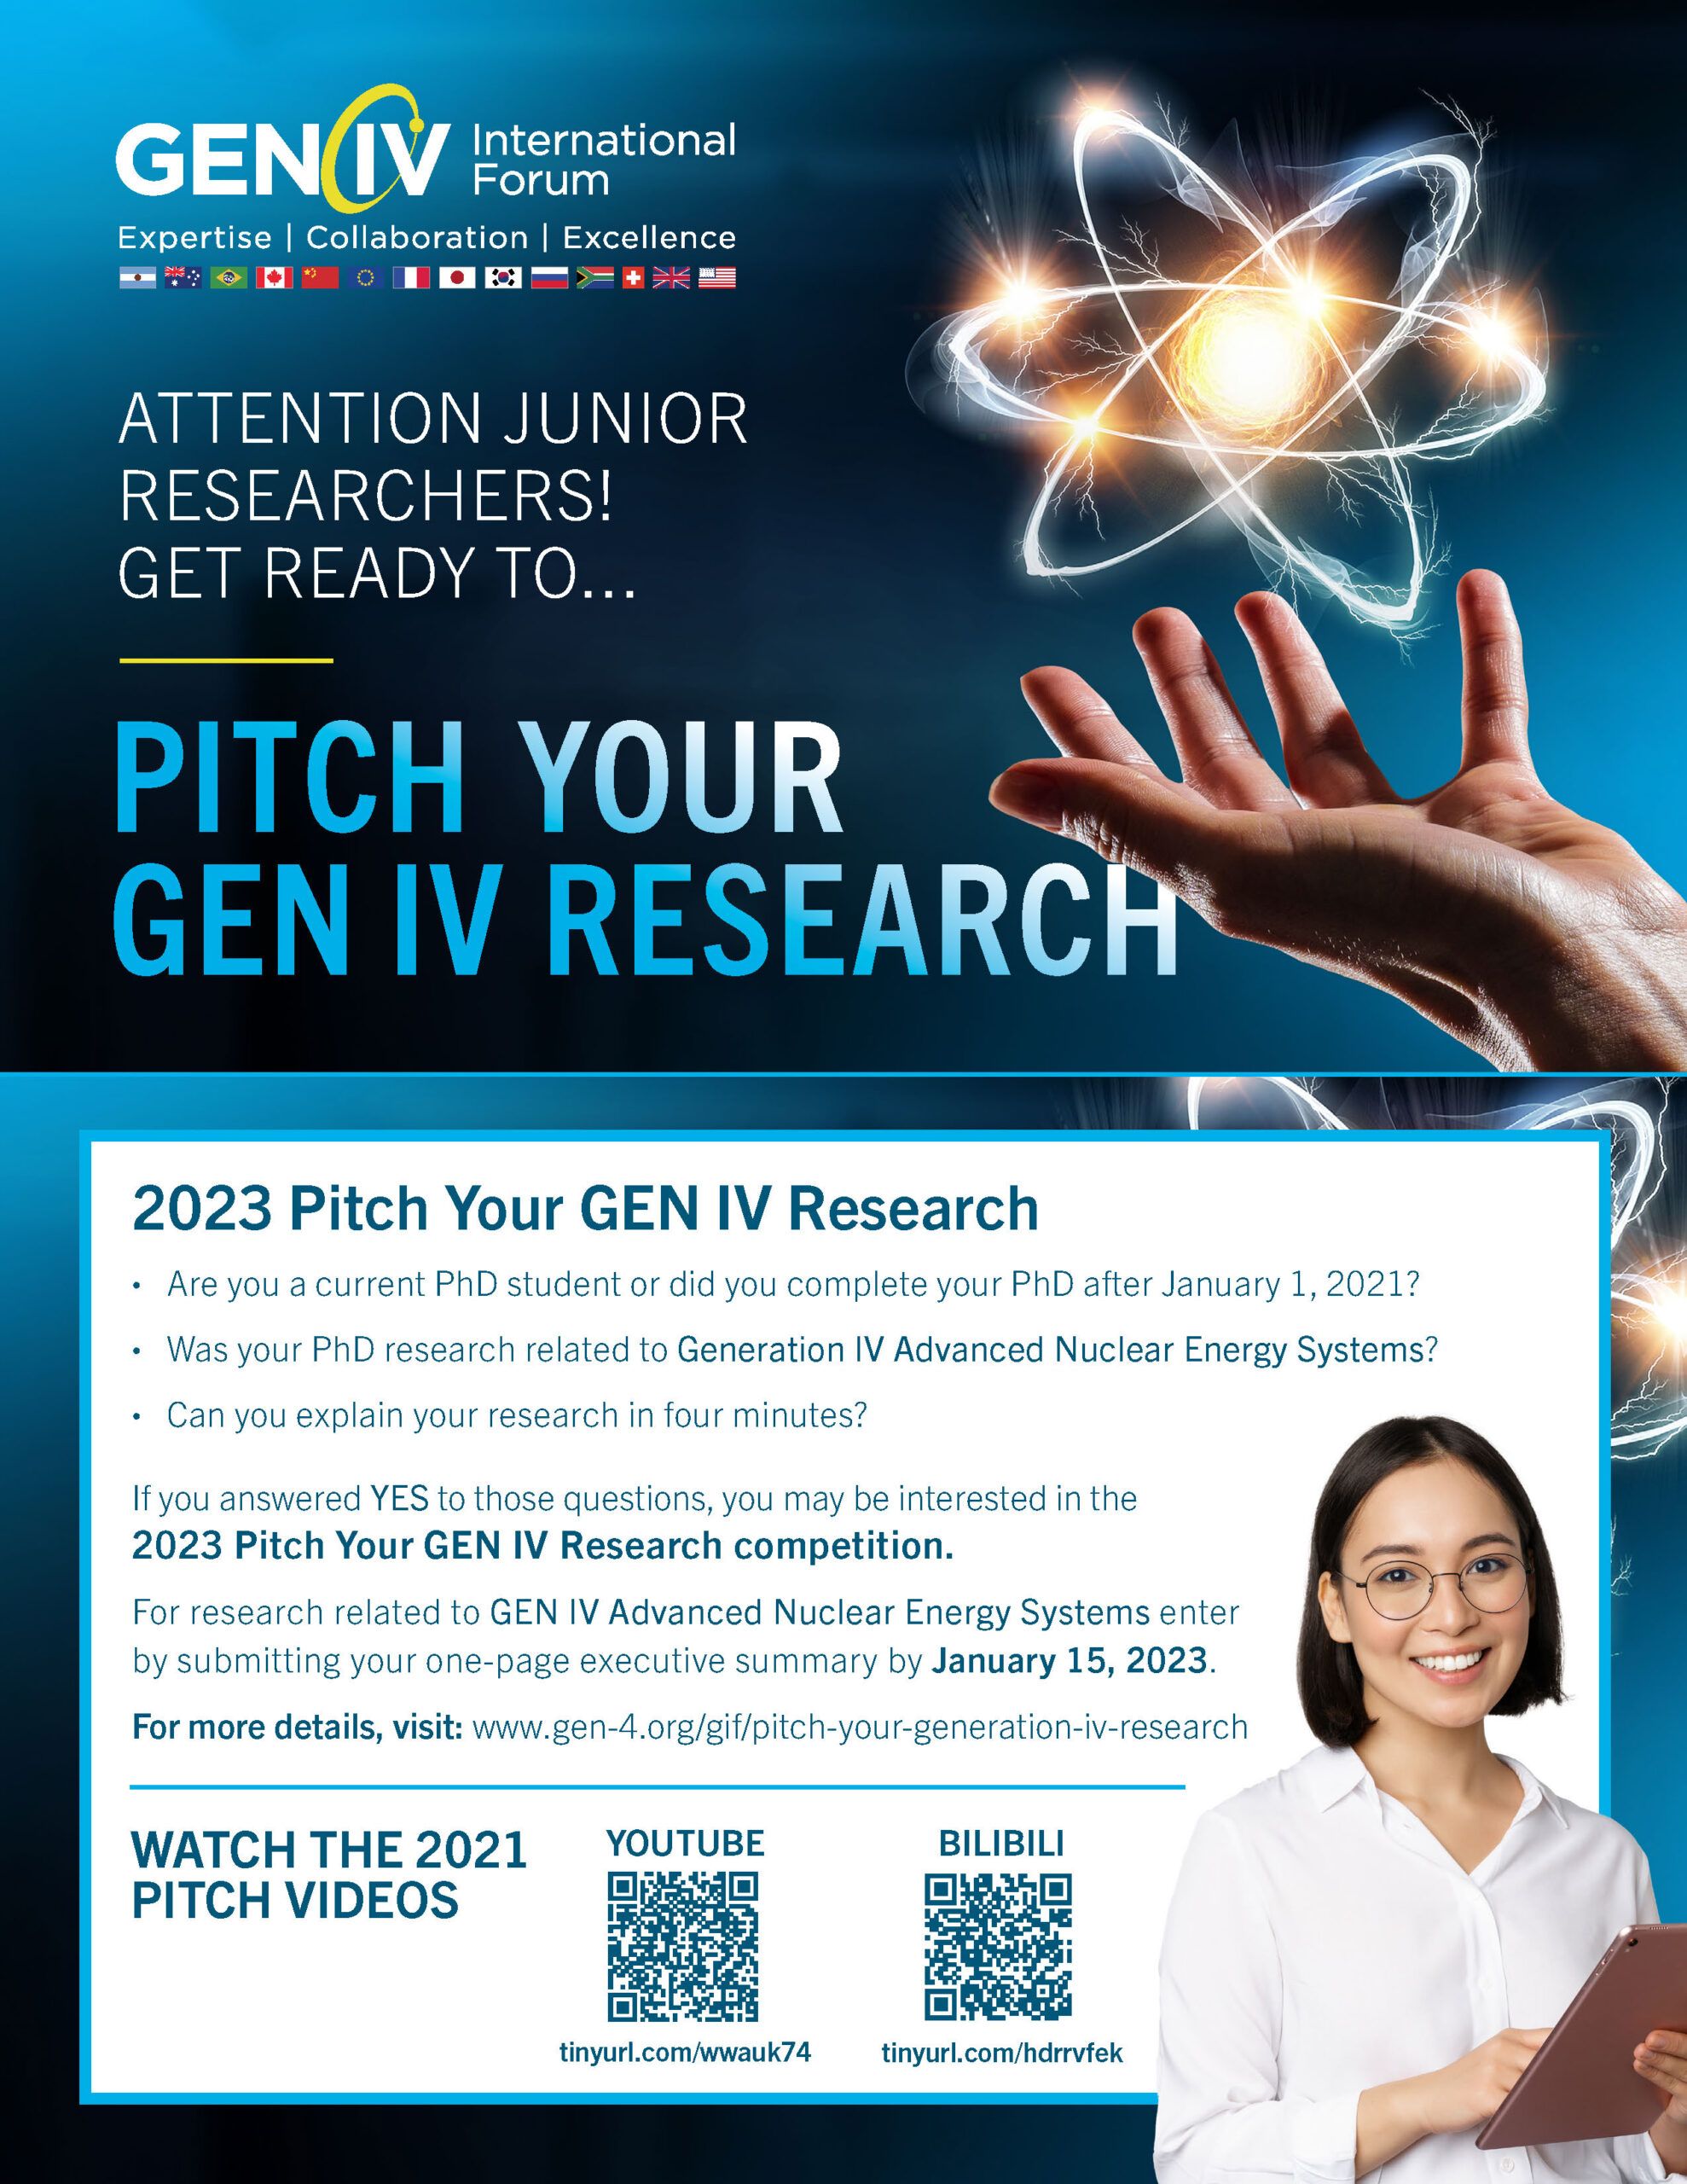 GENIV Pitch Your Generation IV Research Competition